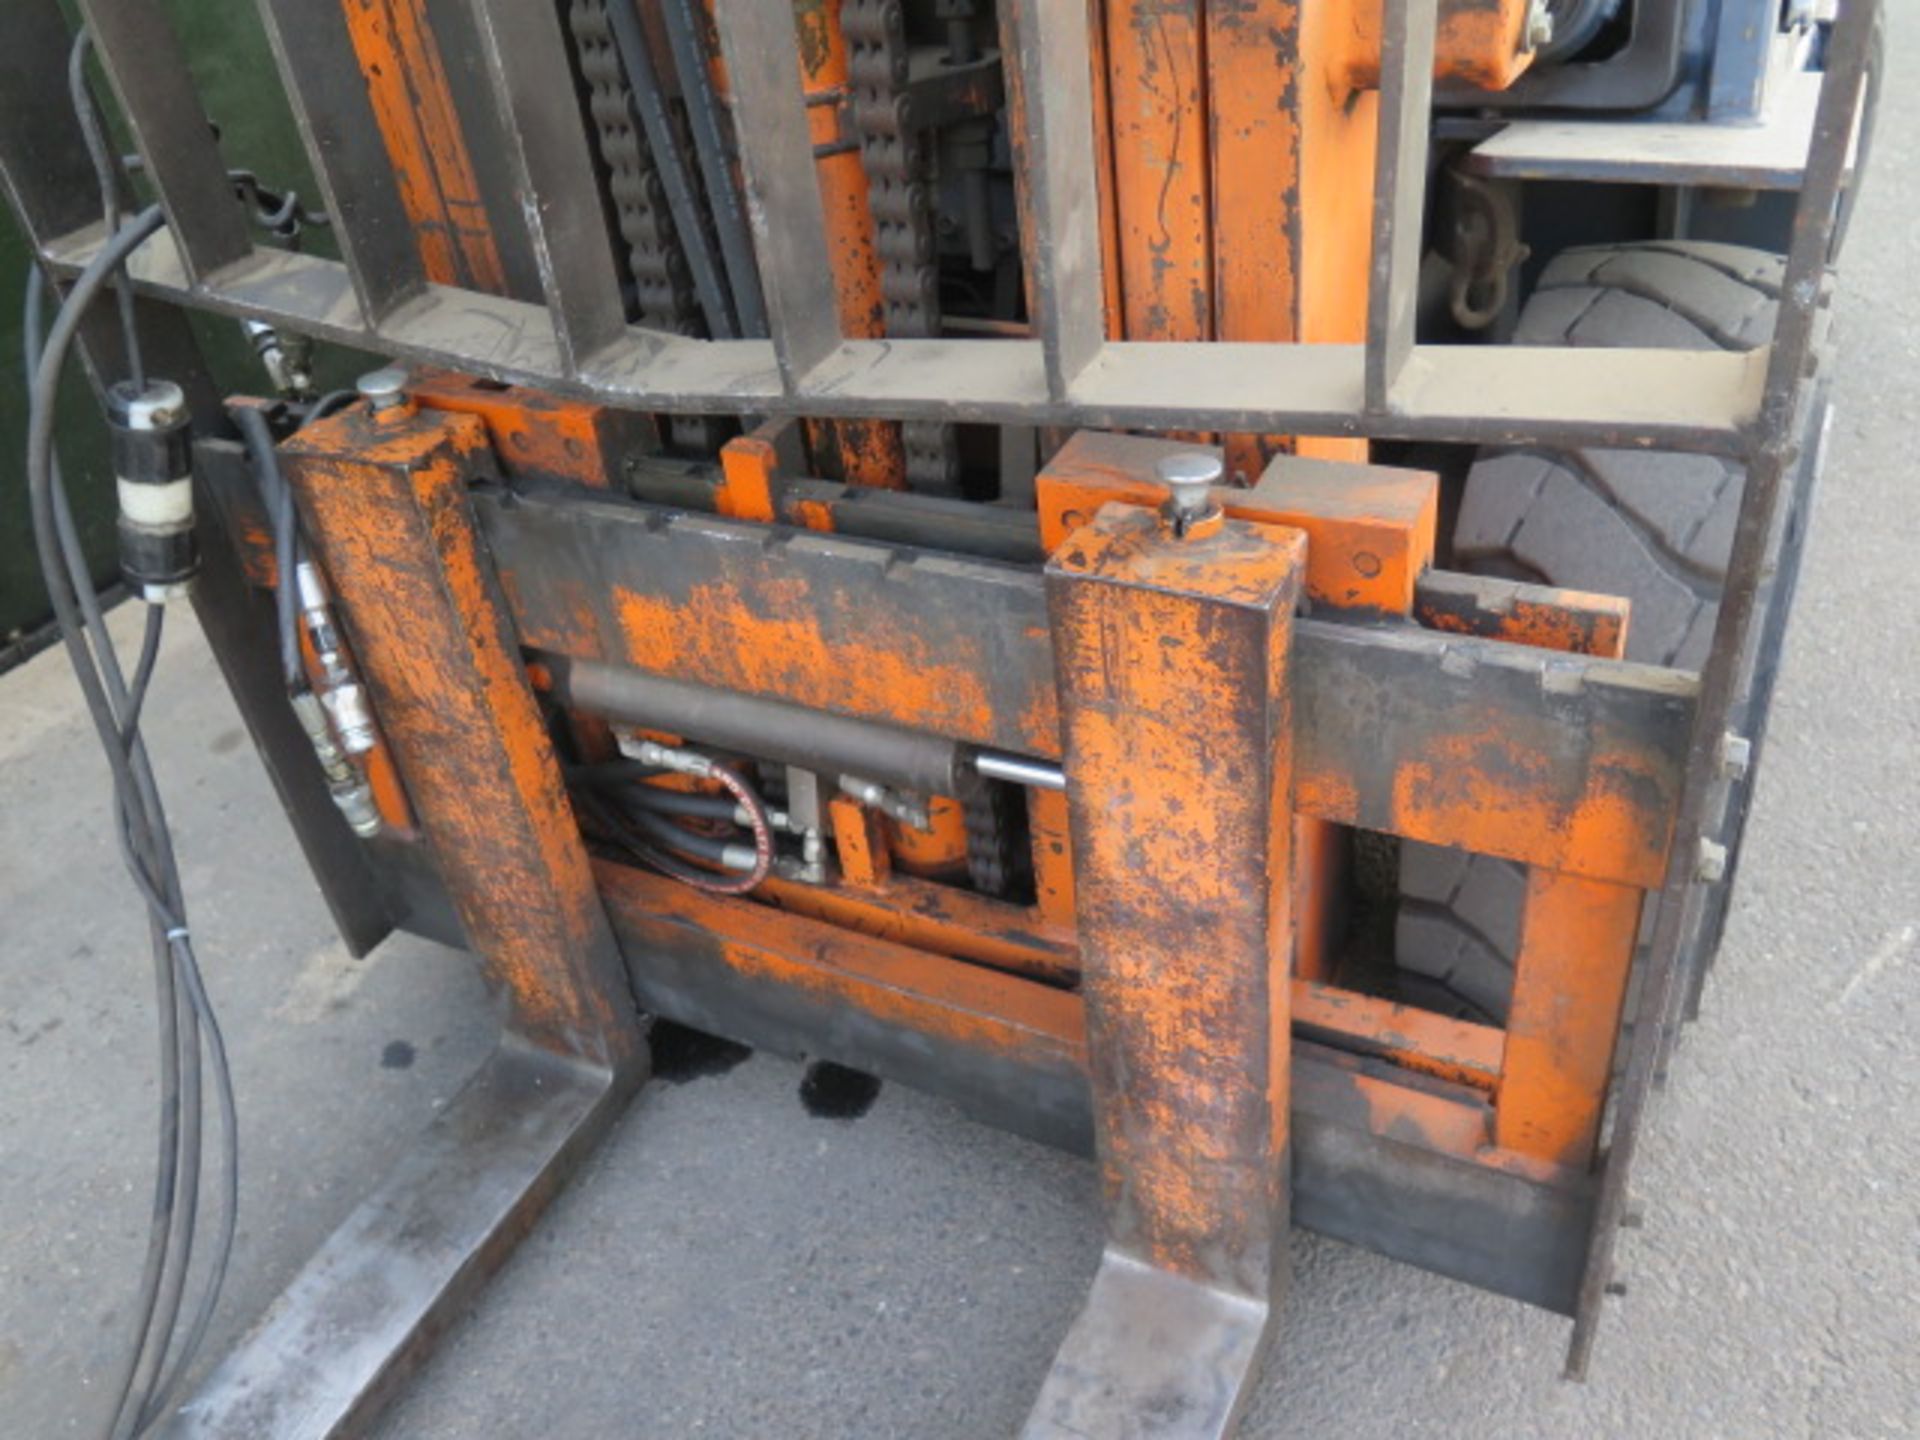 Toyota 02-5FGC30 5800 Lb Cap LPG Forklift s/n 5FGC30-11577 w/ 3-Stage Mast, Side Shift, SOLD AS IS - Image 4 of 11